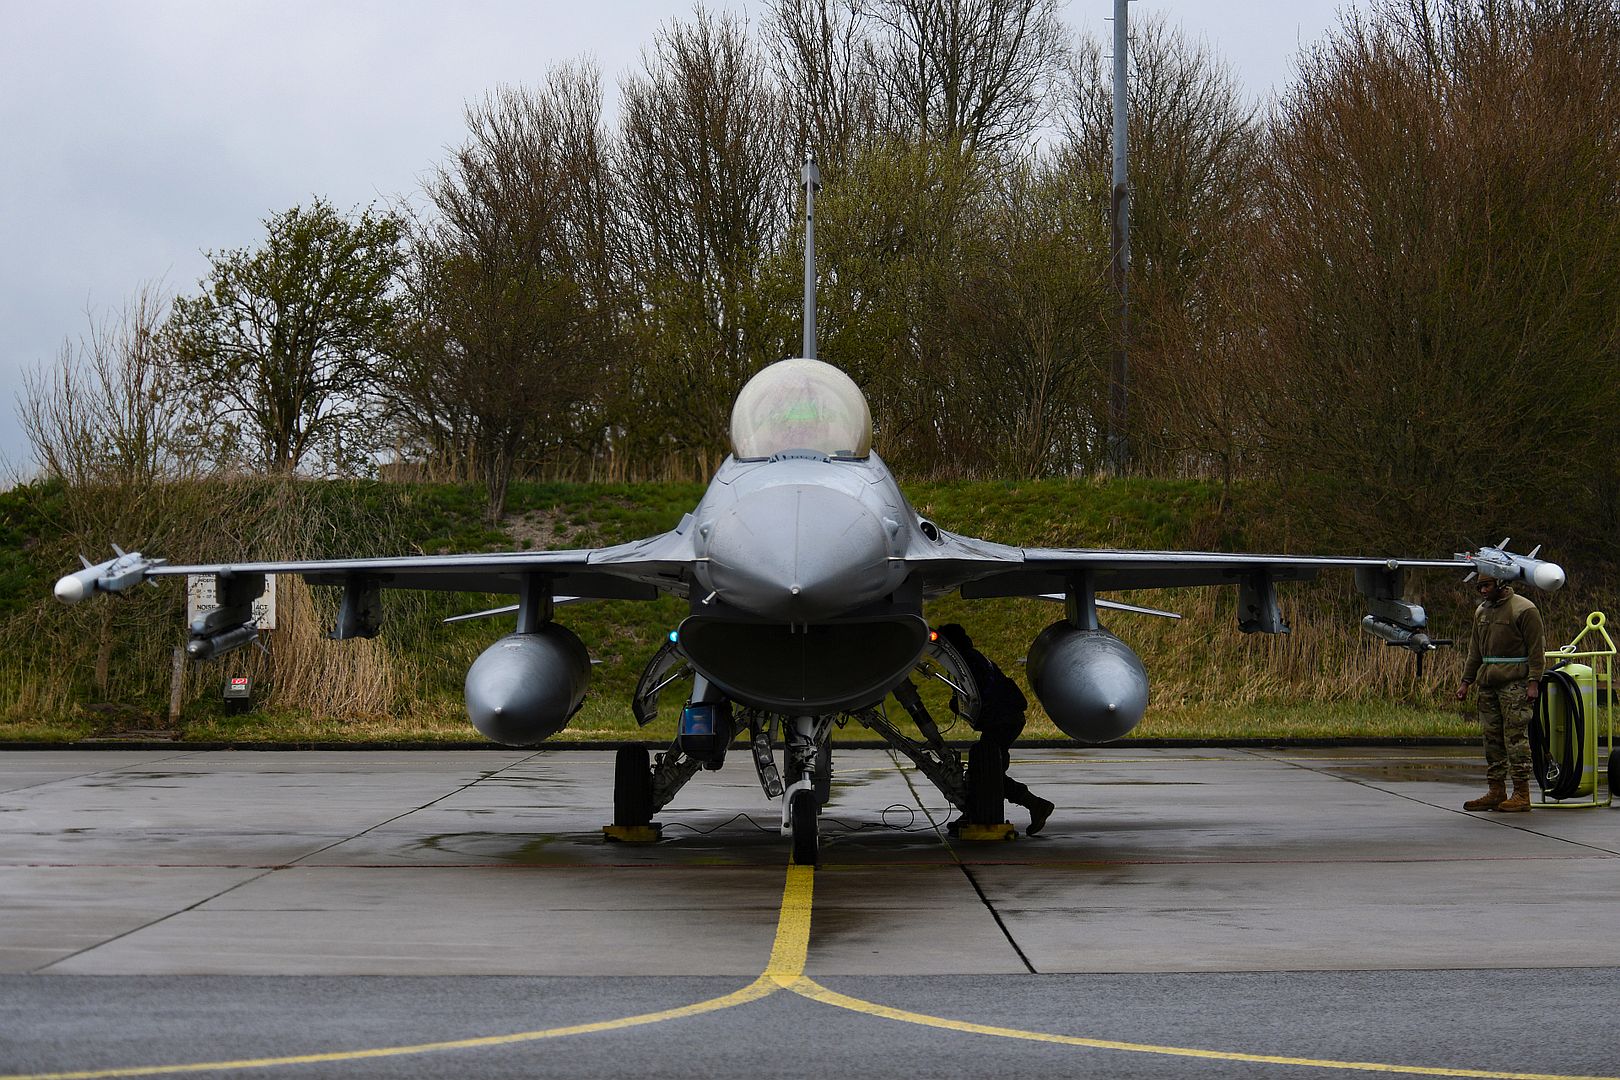 Off During Frisian Flag 22 At Leeuwarden Air Base Netherlands March 31 2022